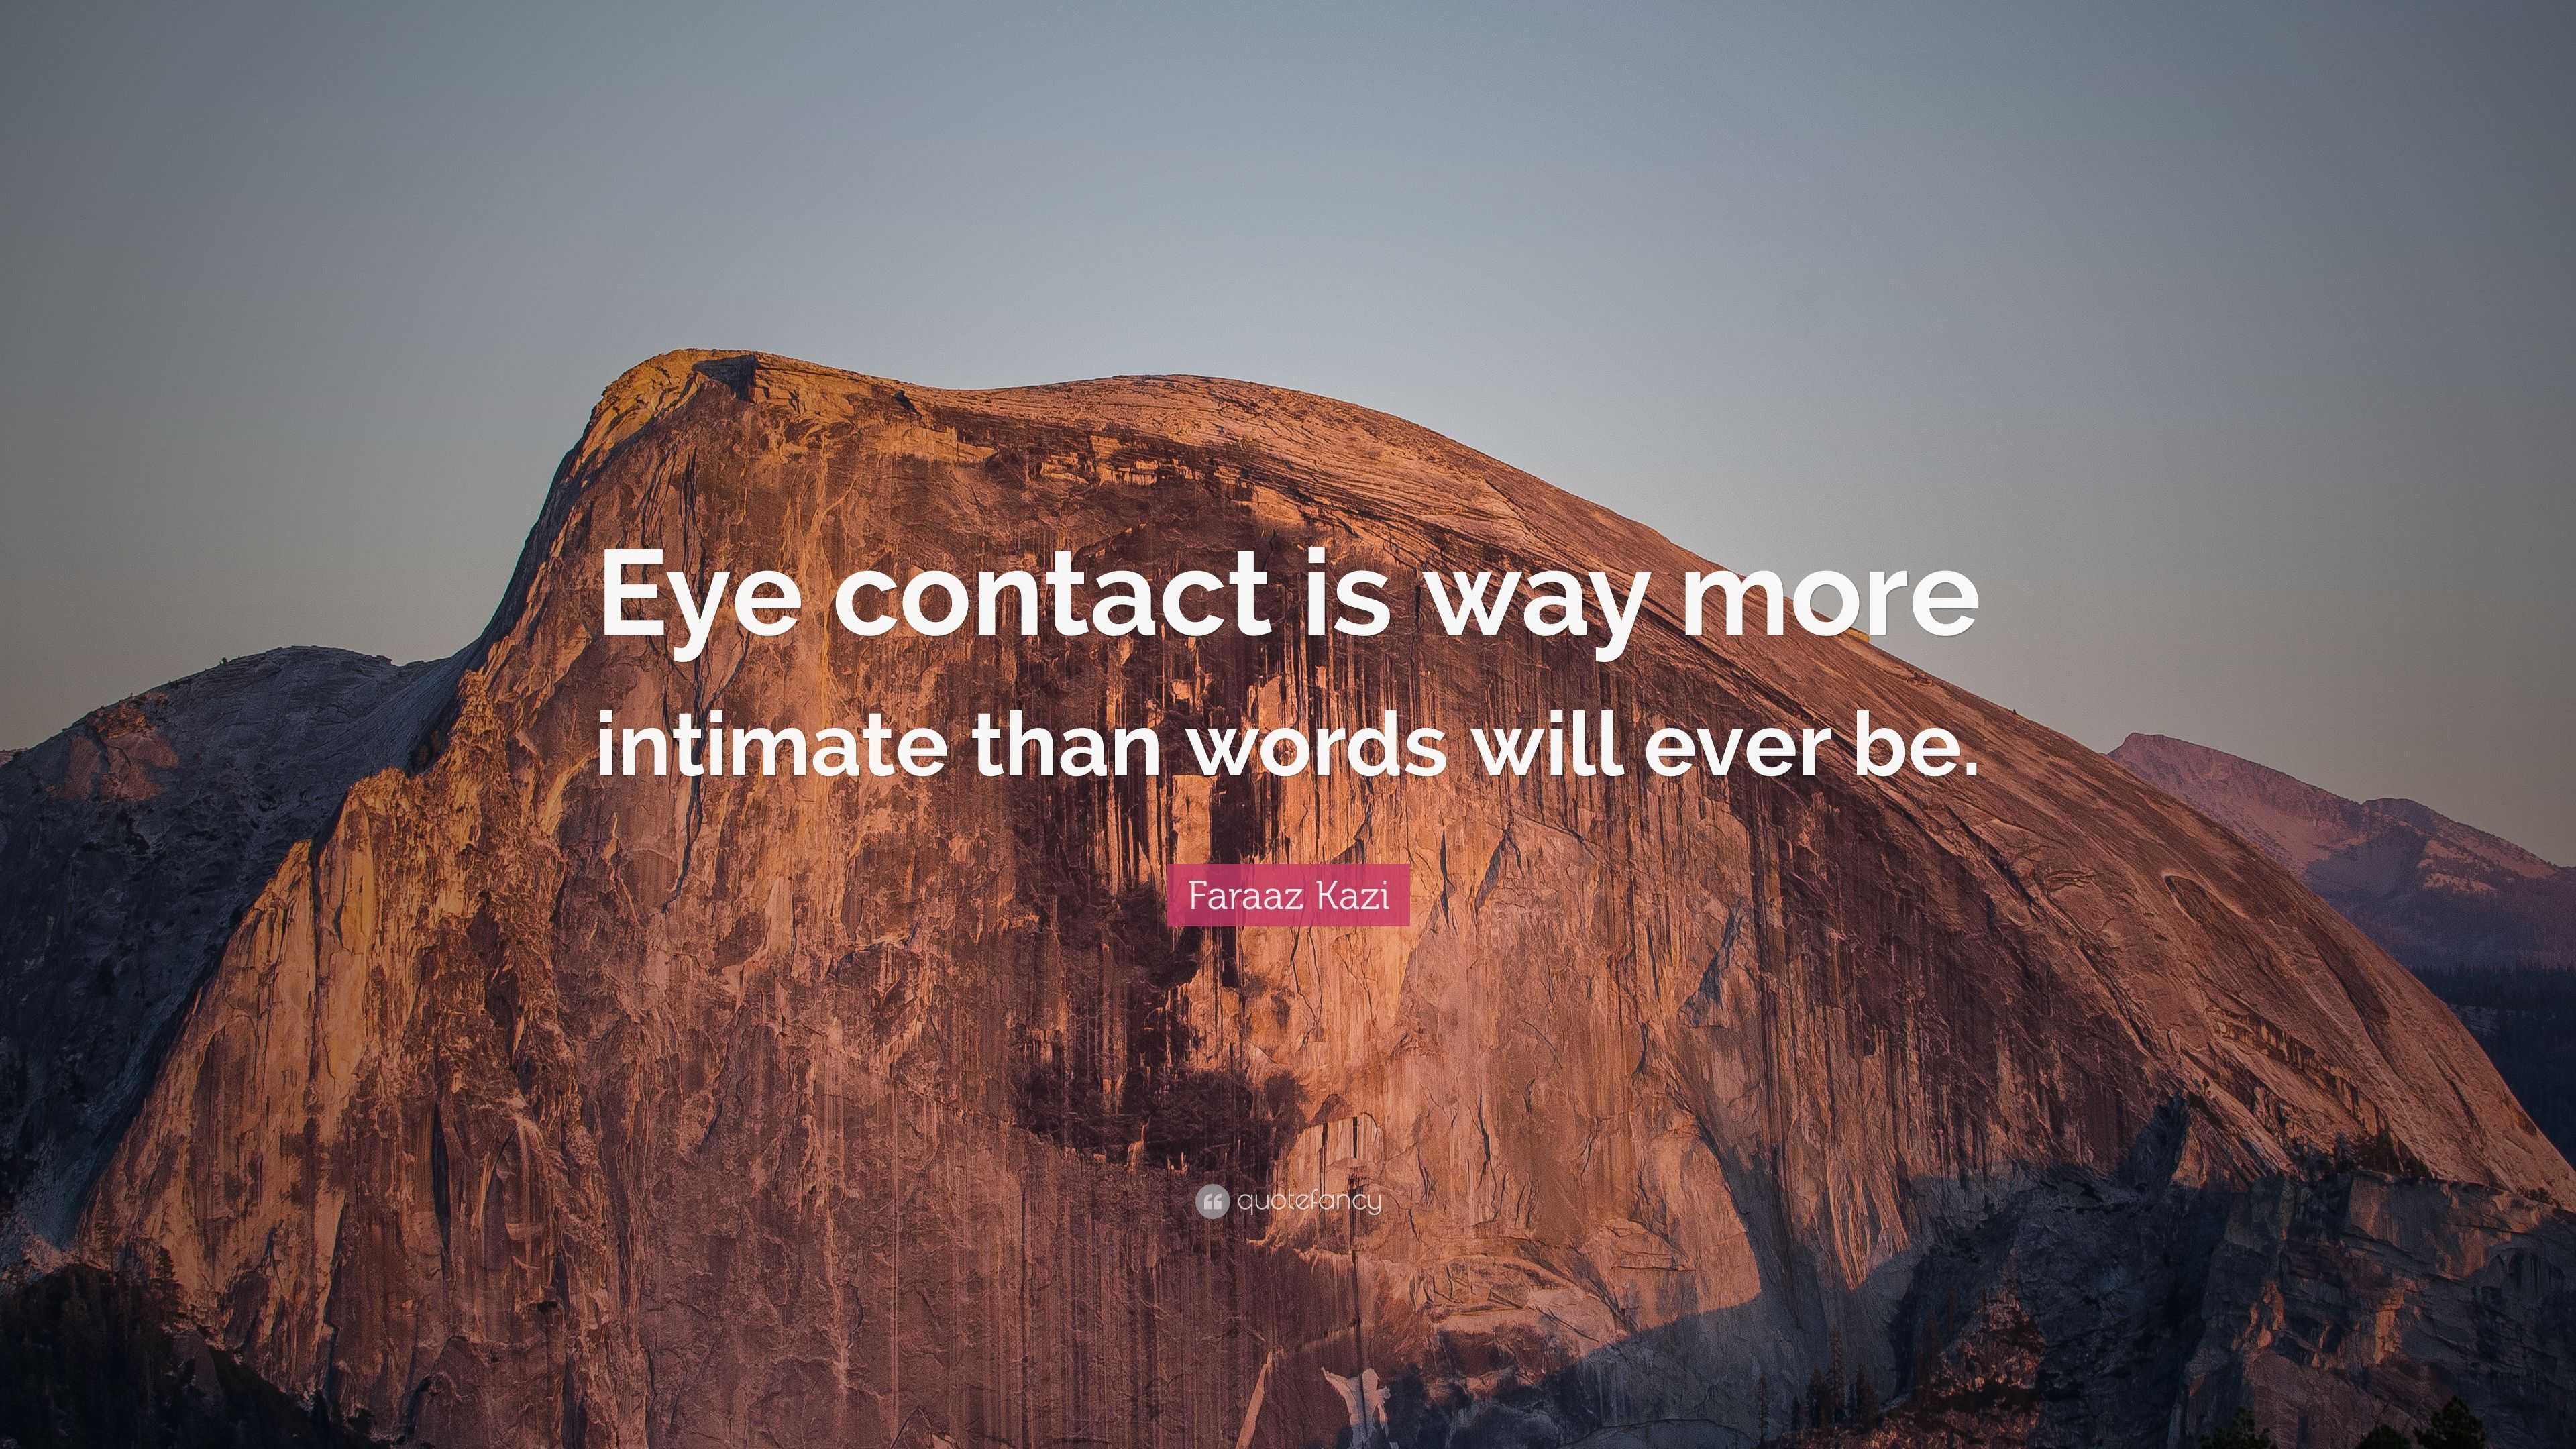 Faraaz Kazi Quote “eye Contact Is Way More Intimate Than Words Will Ever Be” 